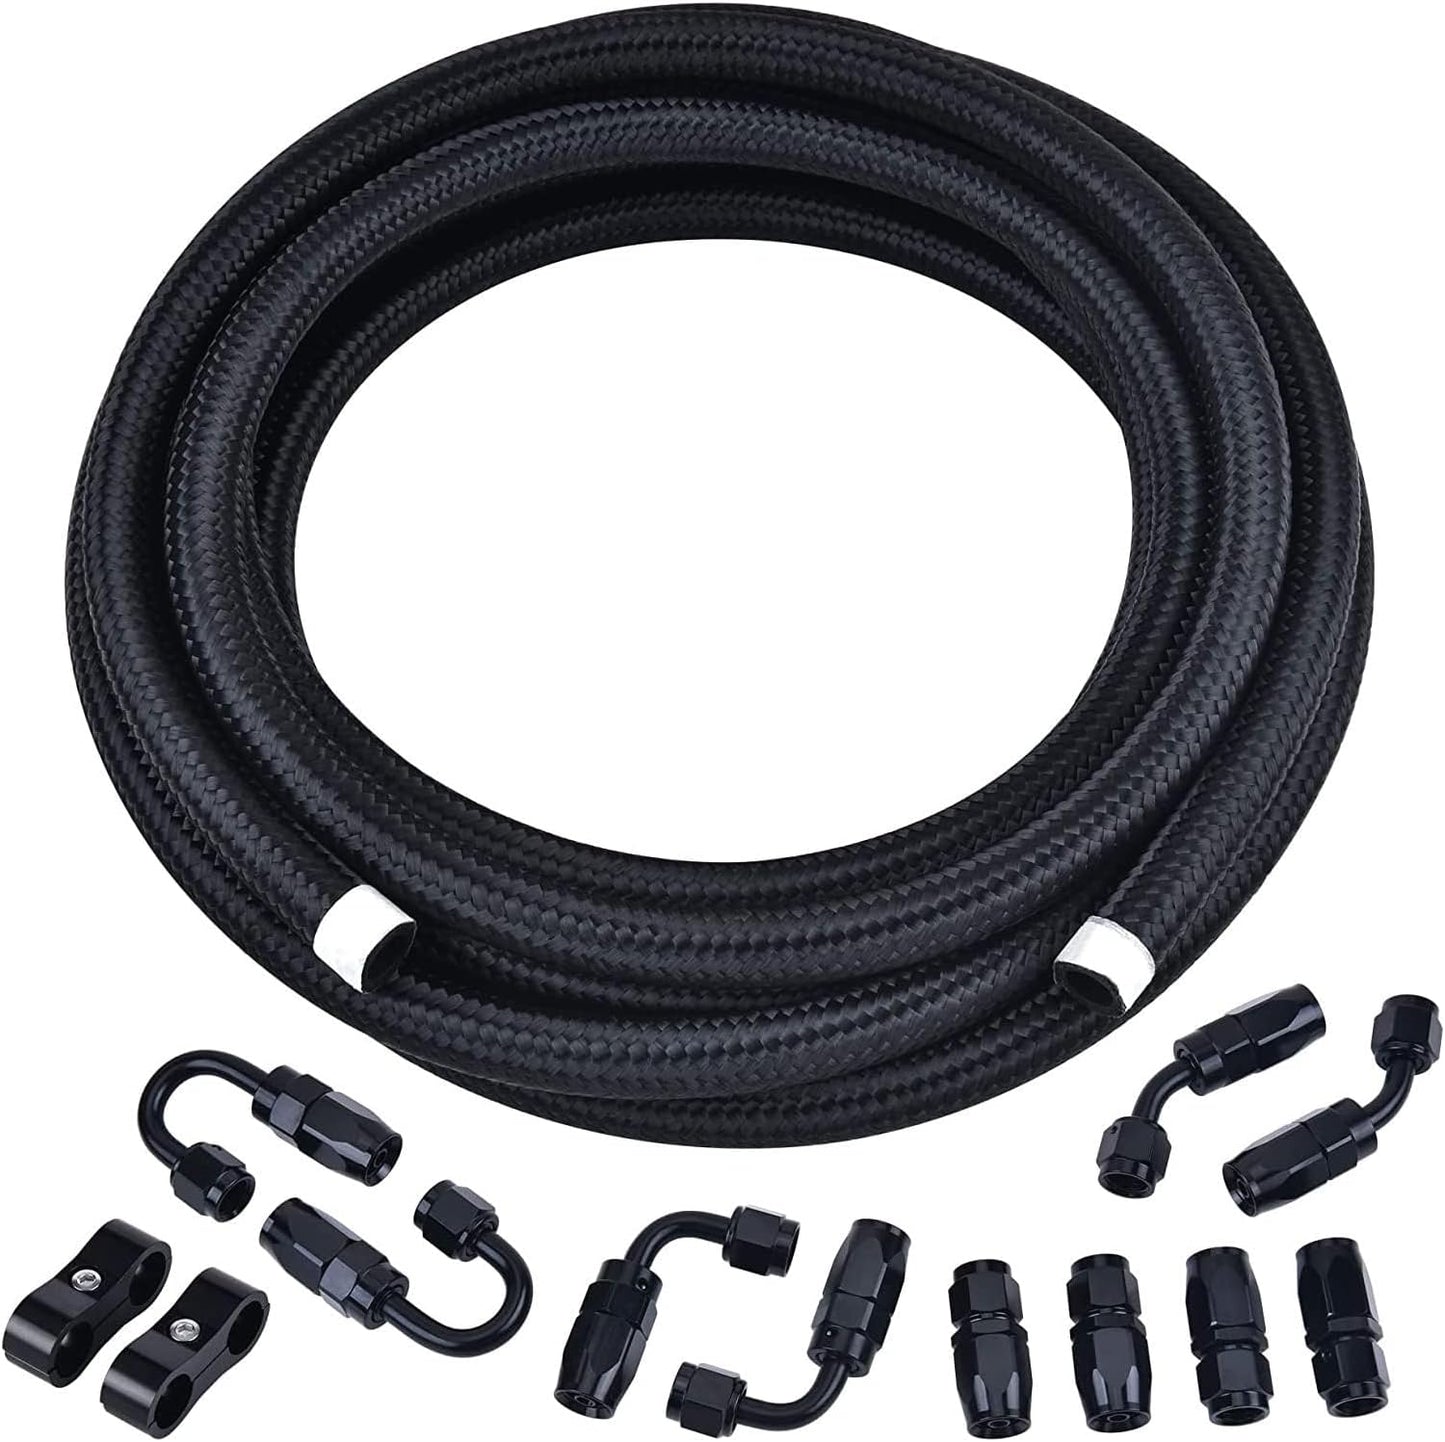 6AN Fuel line hoses with fittings – Classic Performance swaps